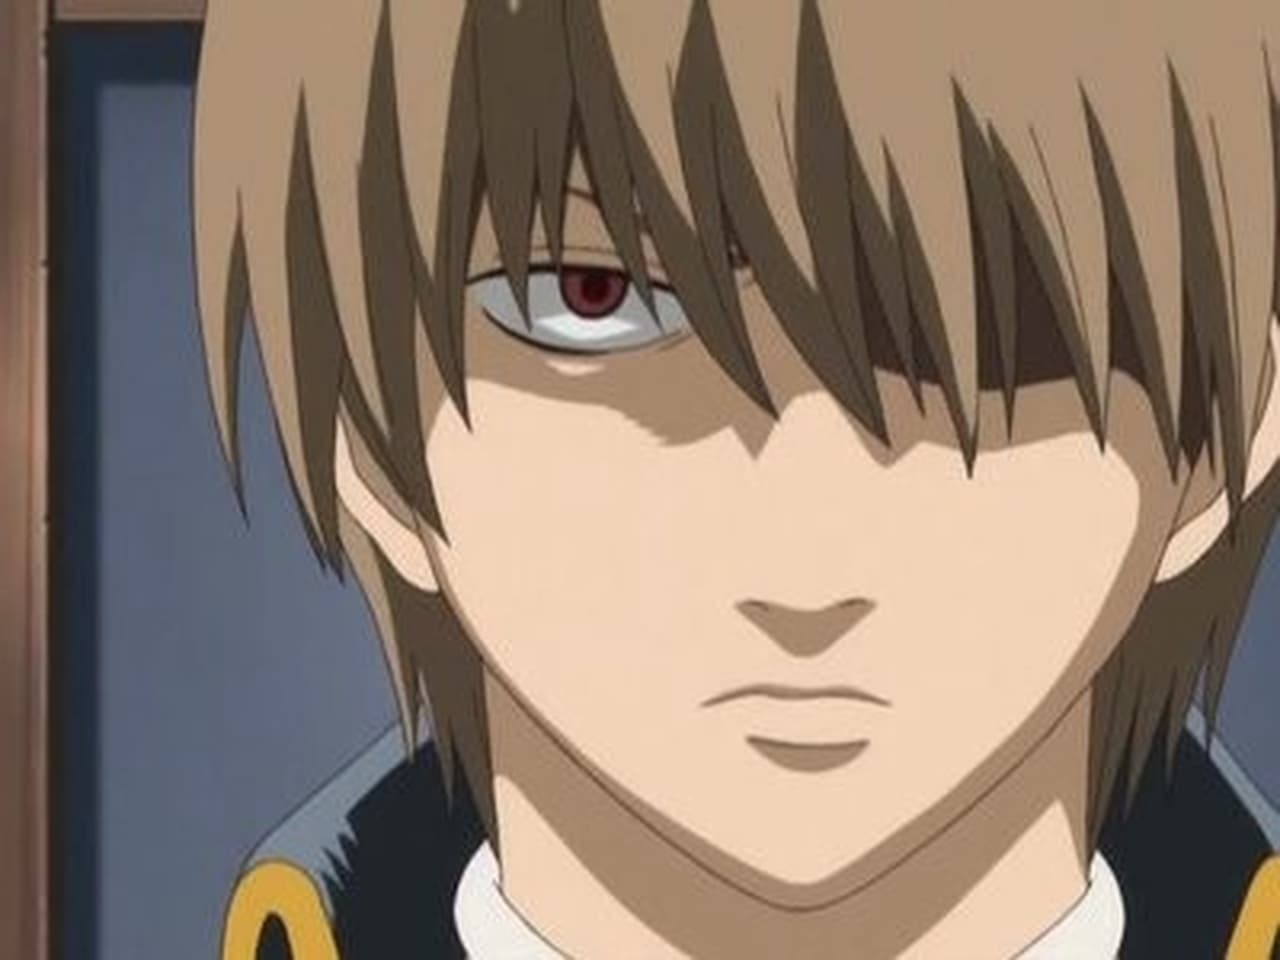 Gintama - Season 3 Episode 4 : There's a Thin Line Between Strengths and Weaknesses